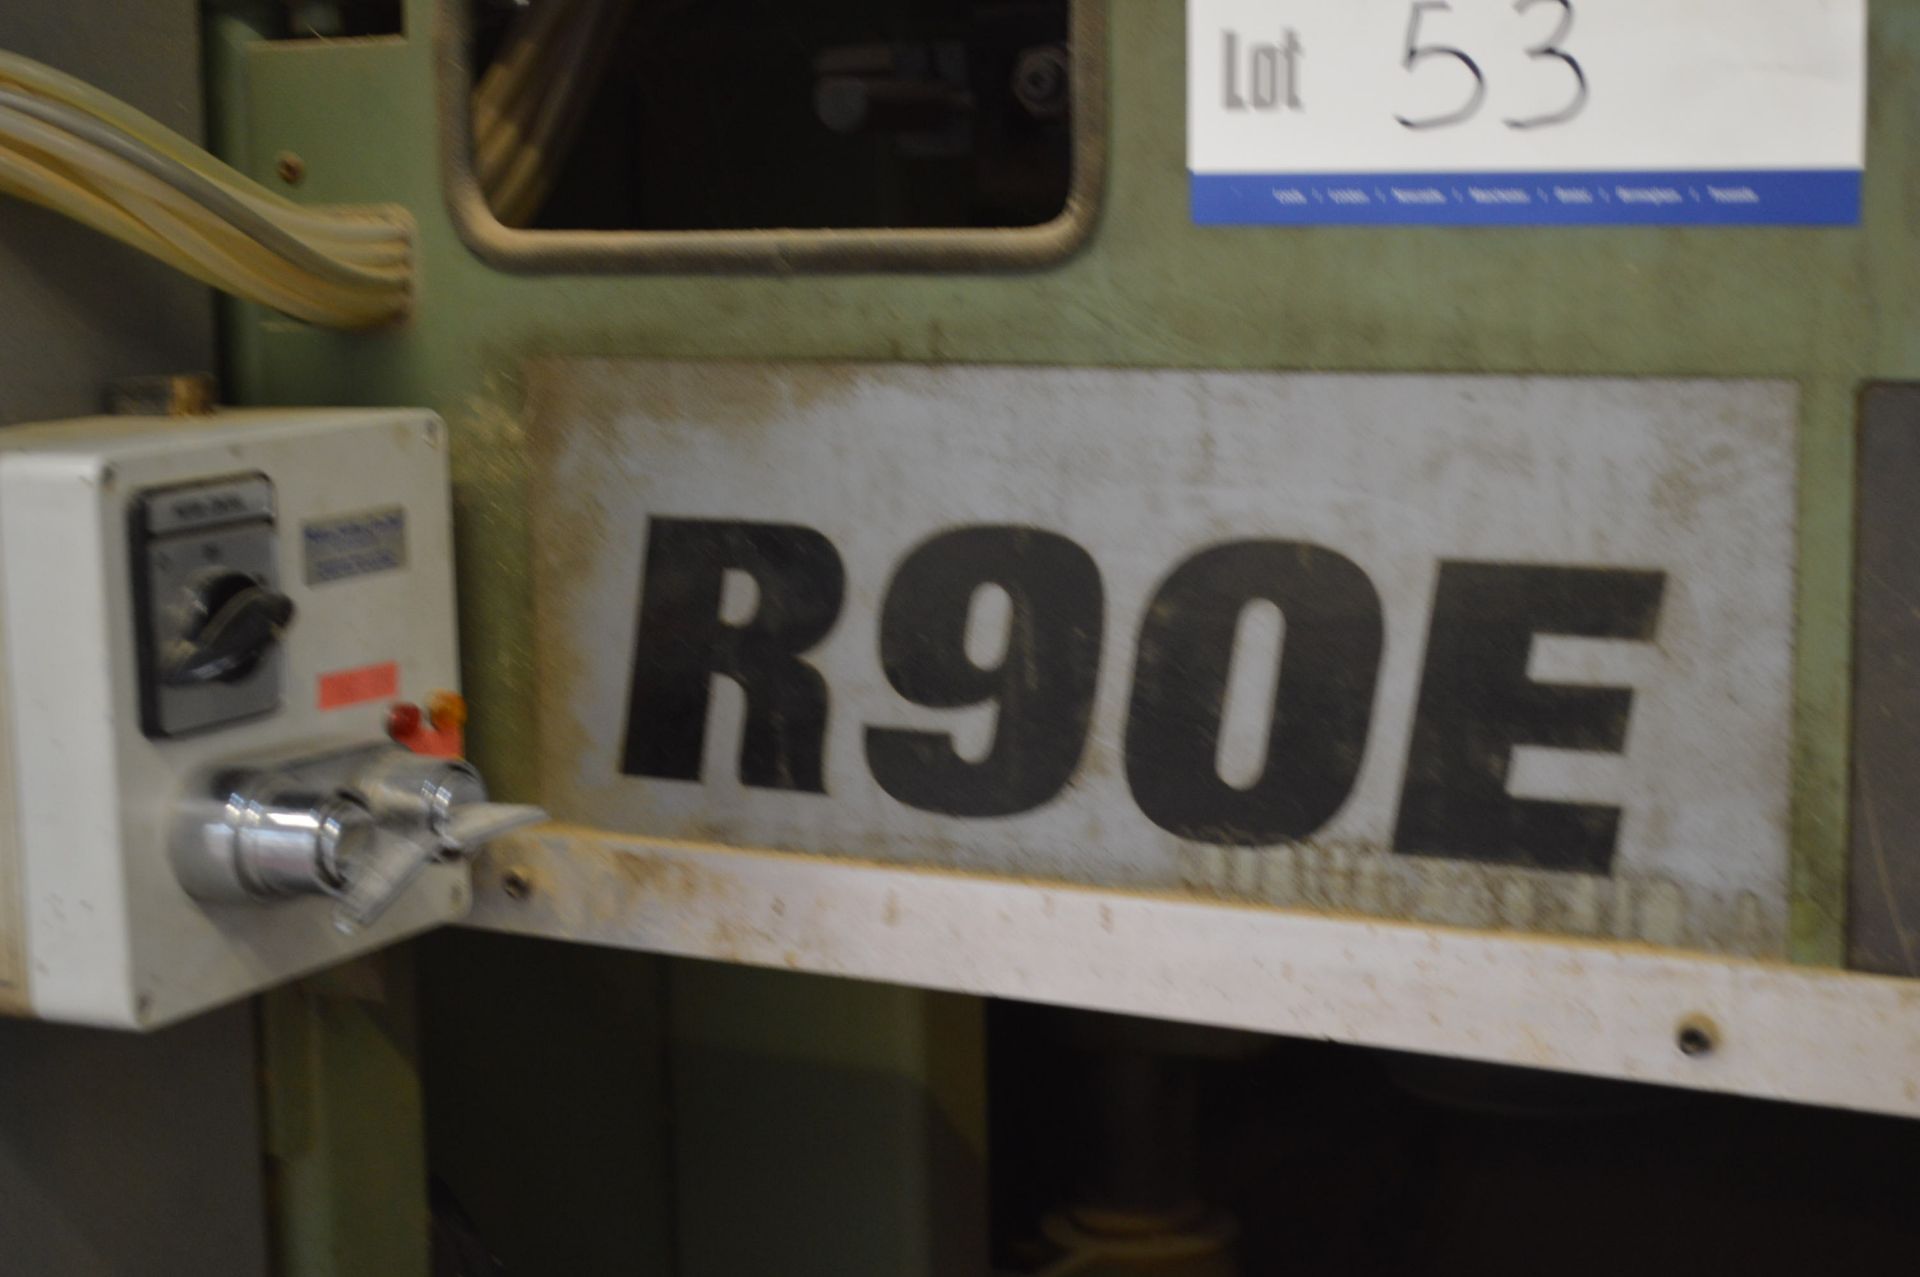 RYE R90E 2C ROTARY TABLE SHAPING MACHINE, serial no. 268 93, with flexible ducting – NOTE collection - Image 10 of 17